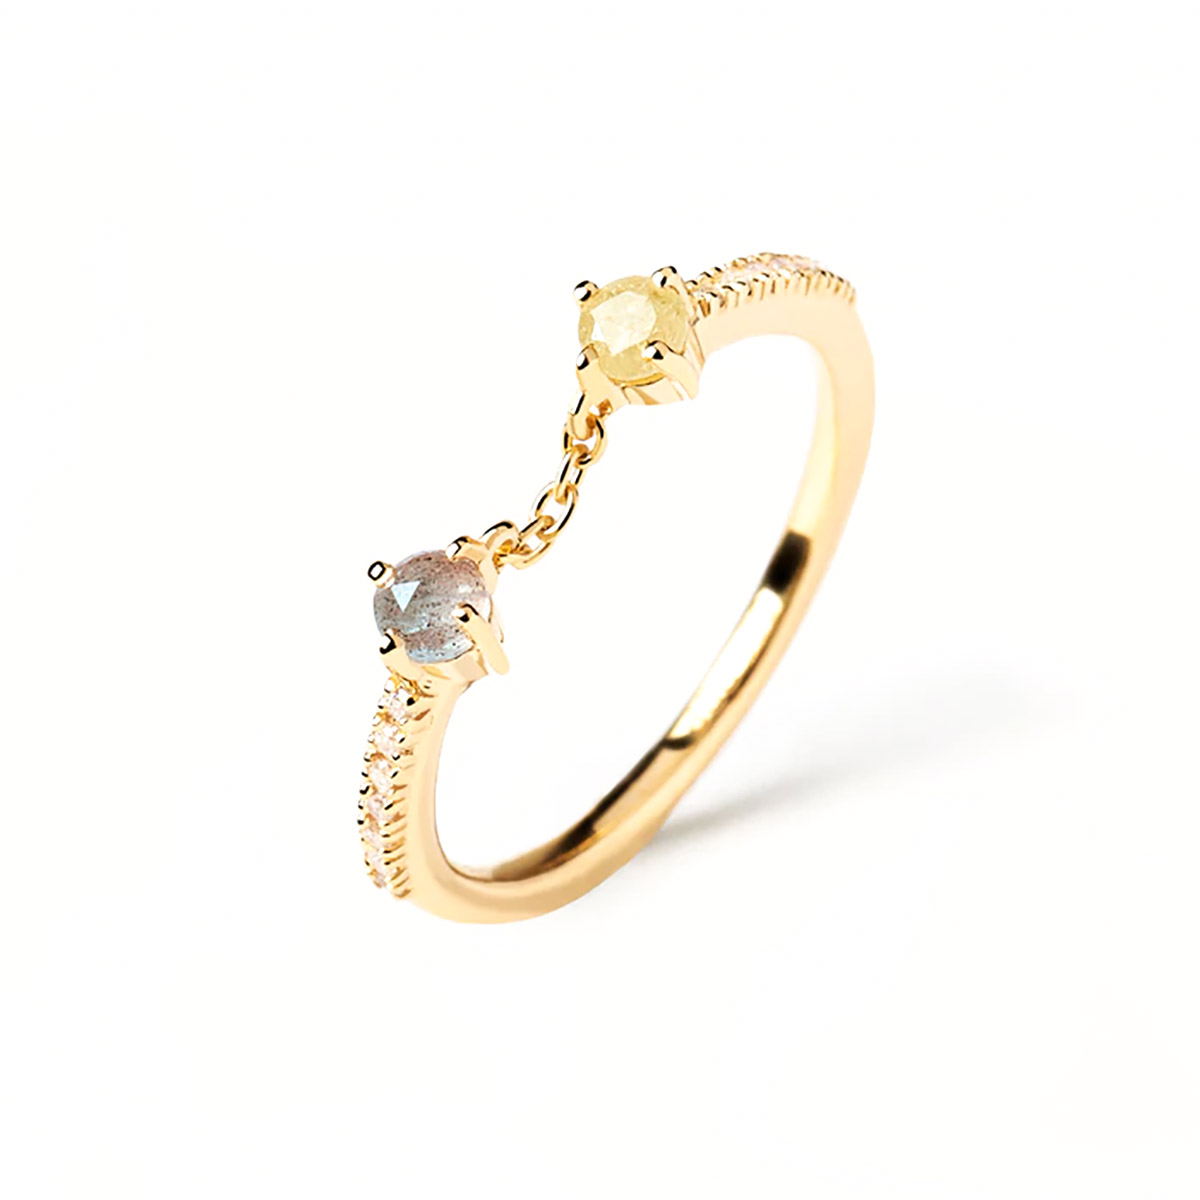 PD Paola Zena Gold Ring - GREEK ROOTS juno COLLECTION